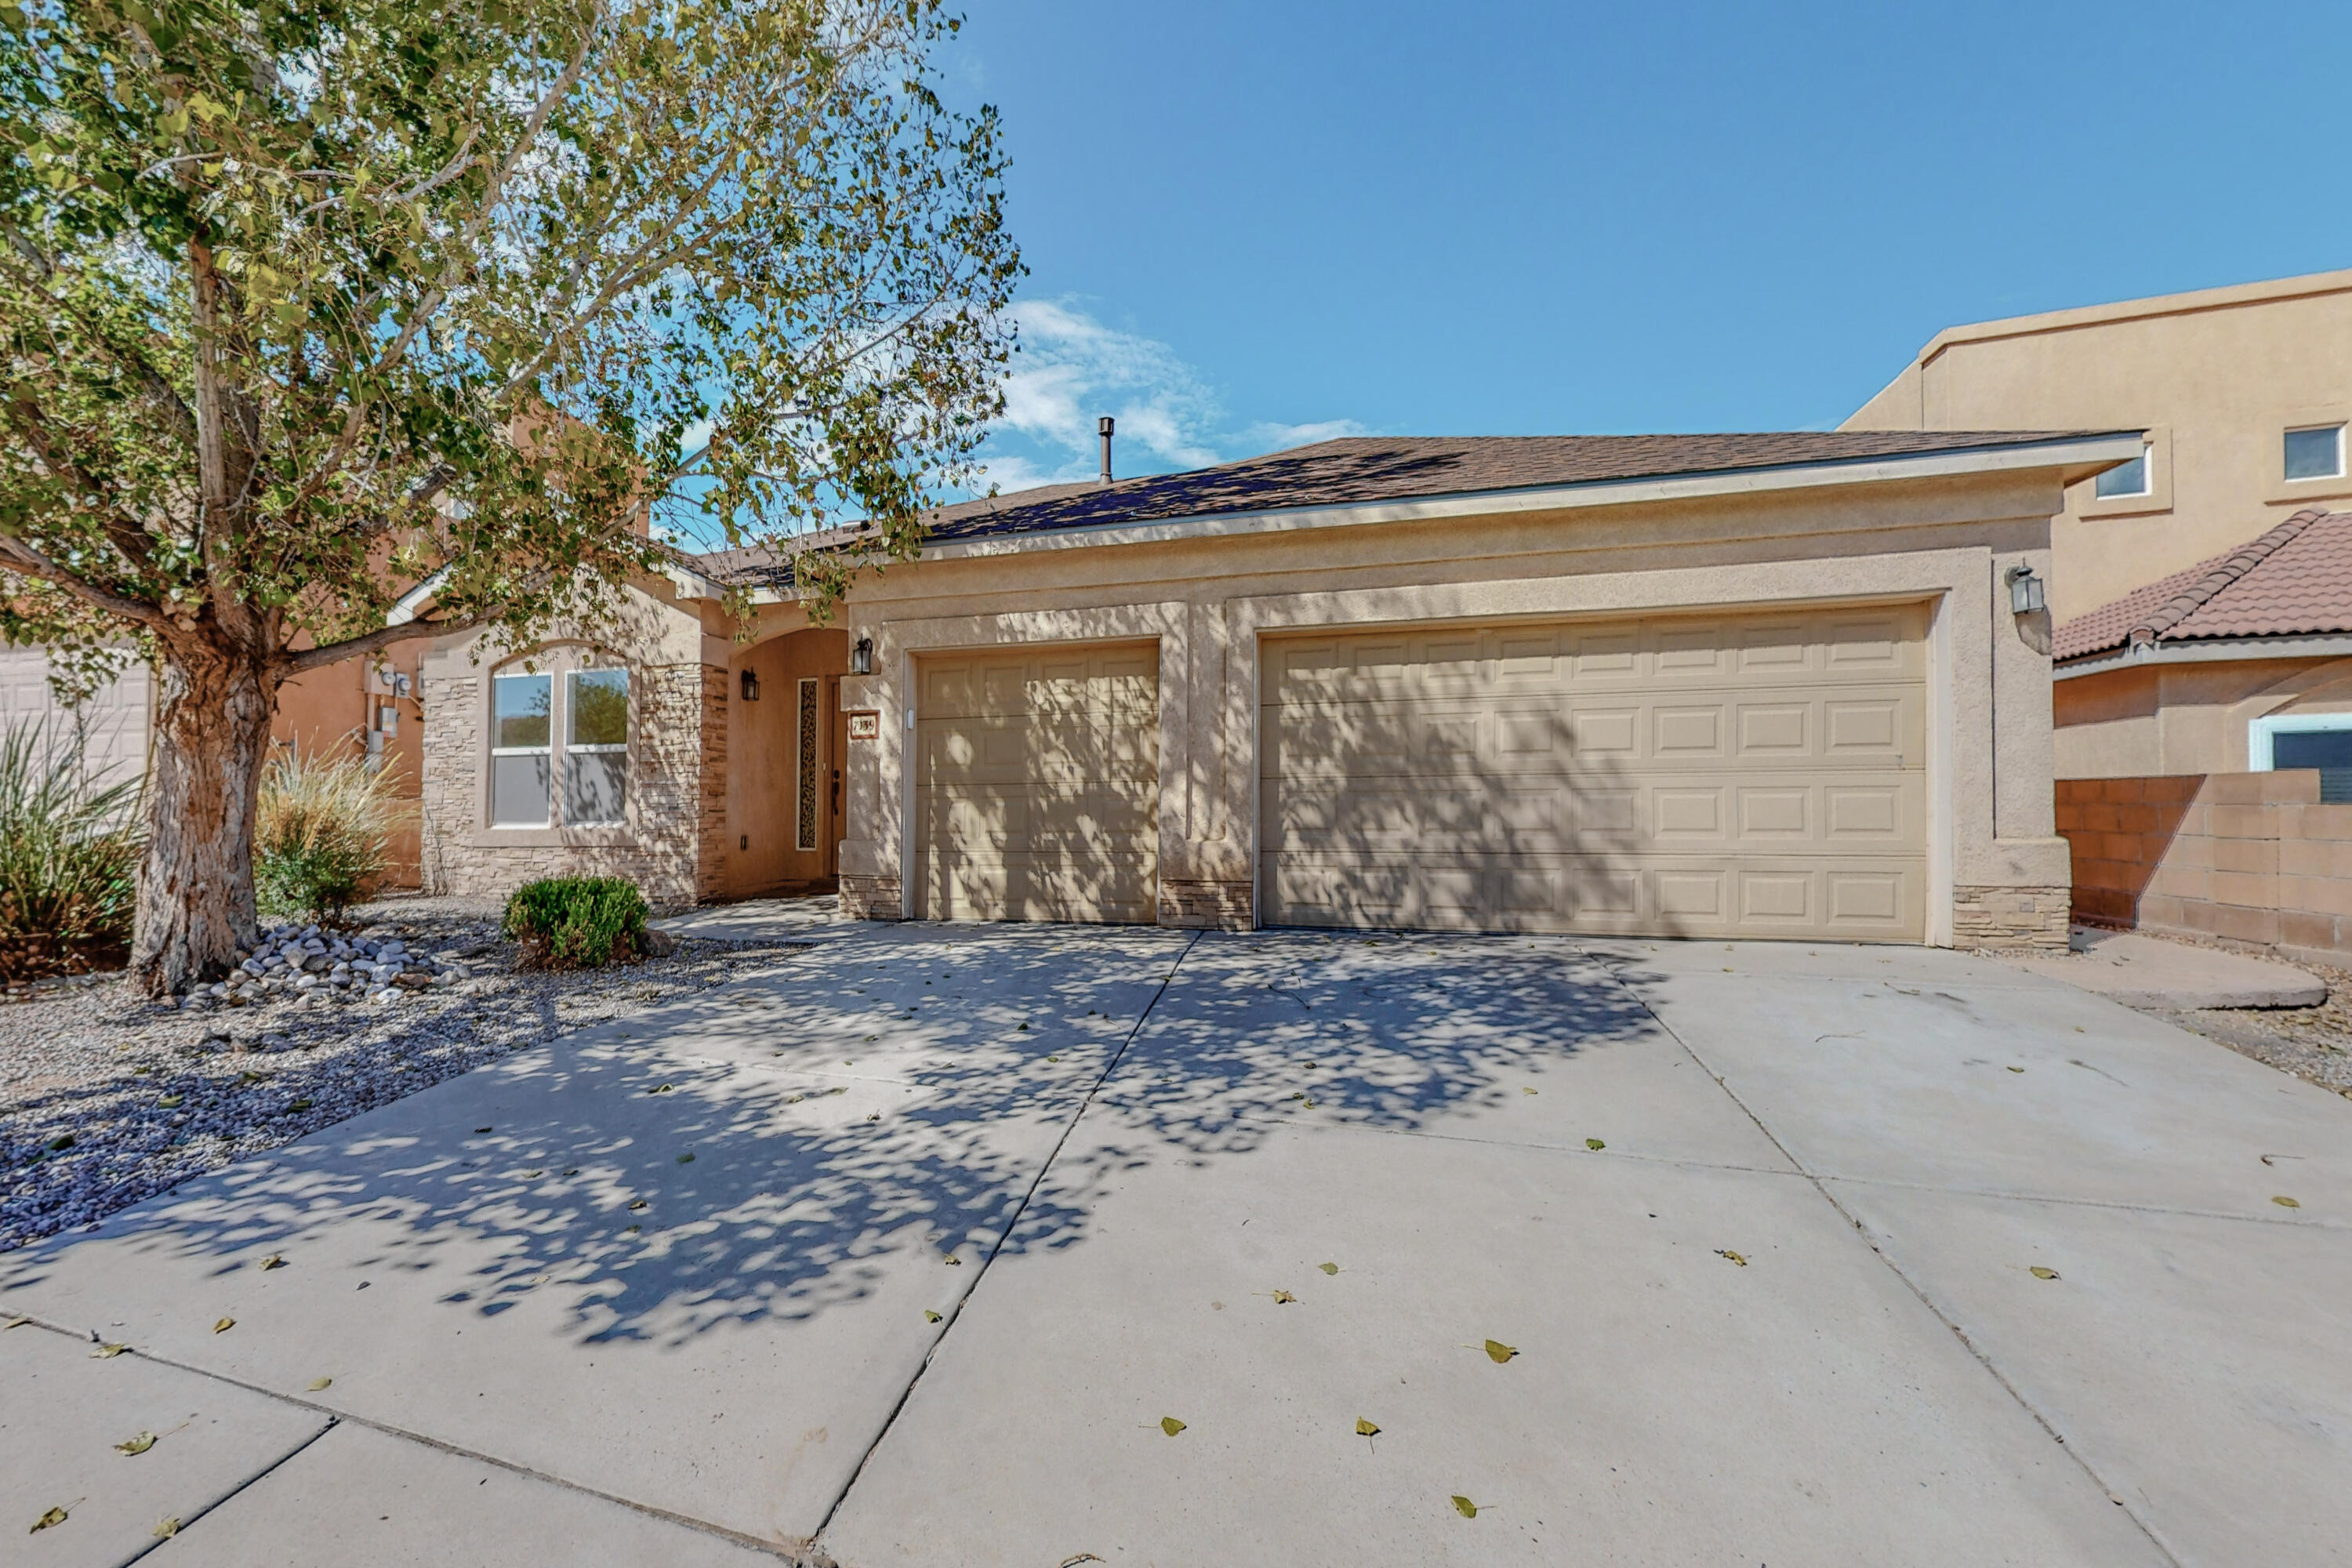 Looking for a 4 bedroom home? This home is ready for its new owners!!  Offering 4 bedrooms, 2 baths, 3 car garage, new carpet, paint, ceiling fans, gated neighborhood and Conveniently located near Volcano Vista high school.  Come take a look today.